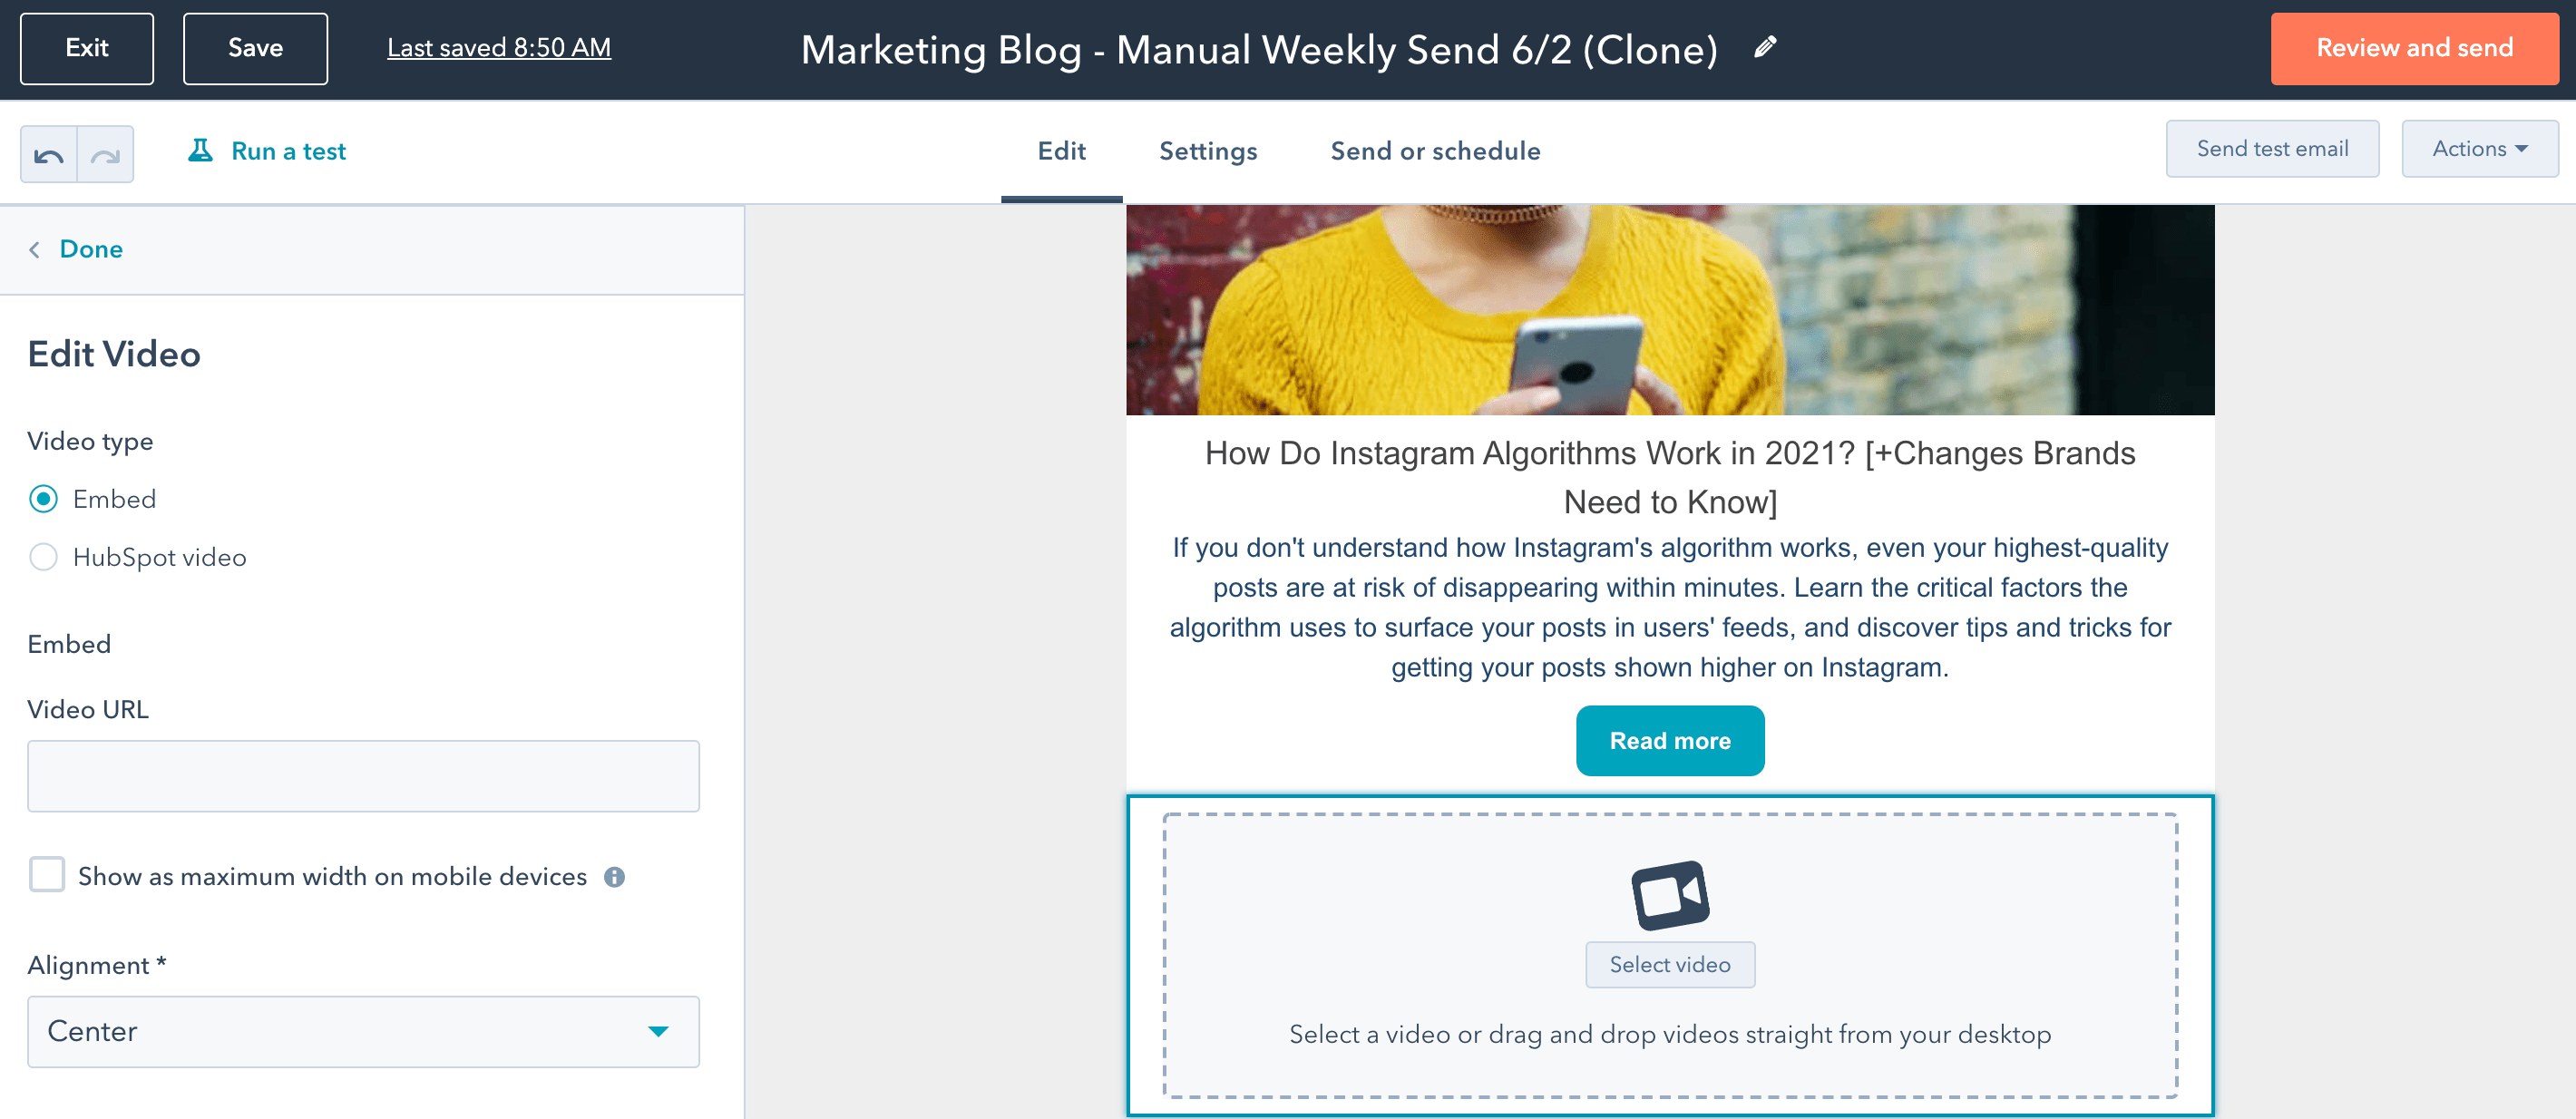 Select the videos to be included in the HubSpot email